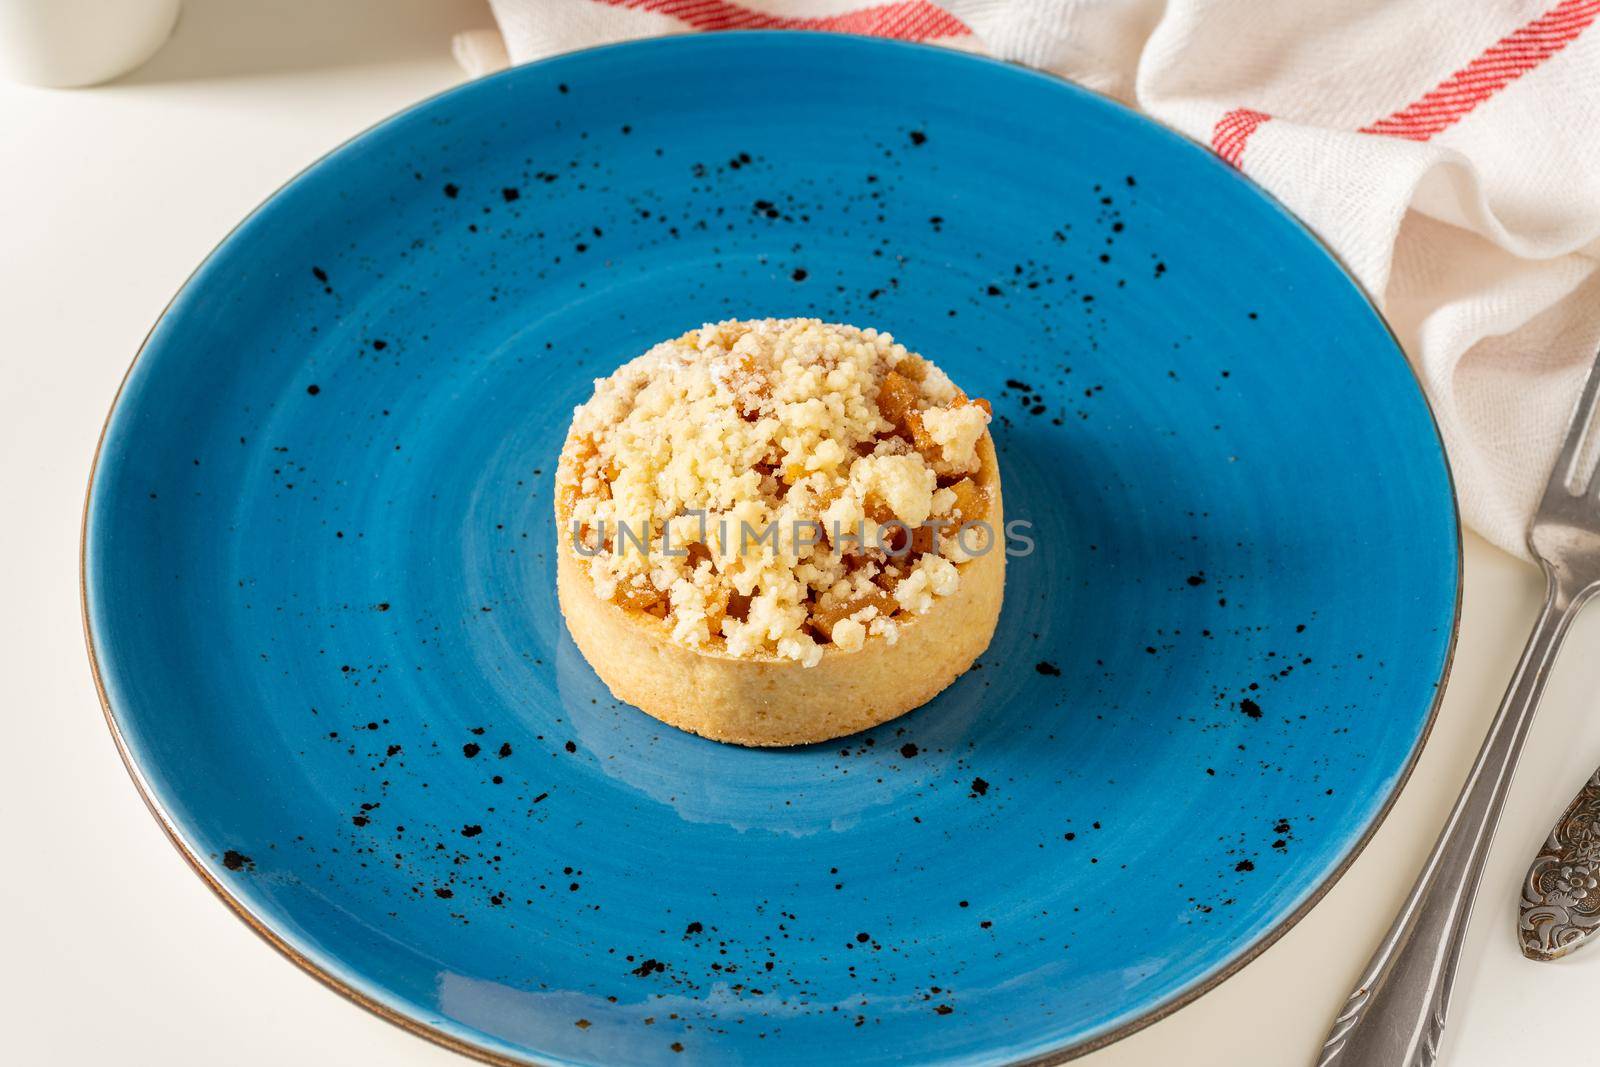 Freshly baked single portion apple pie on a blue porcelain plate by Sonat